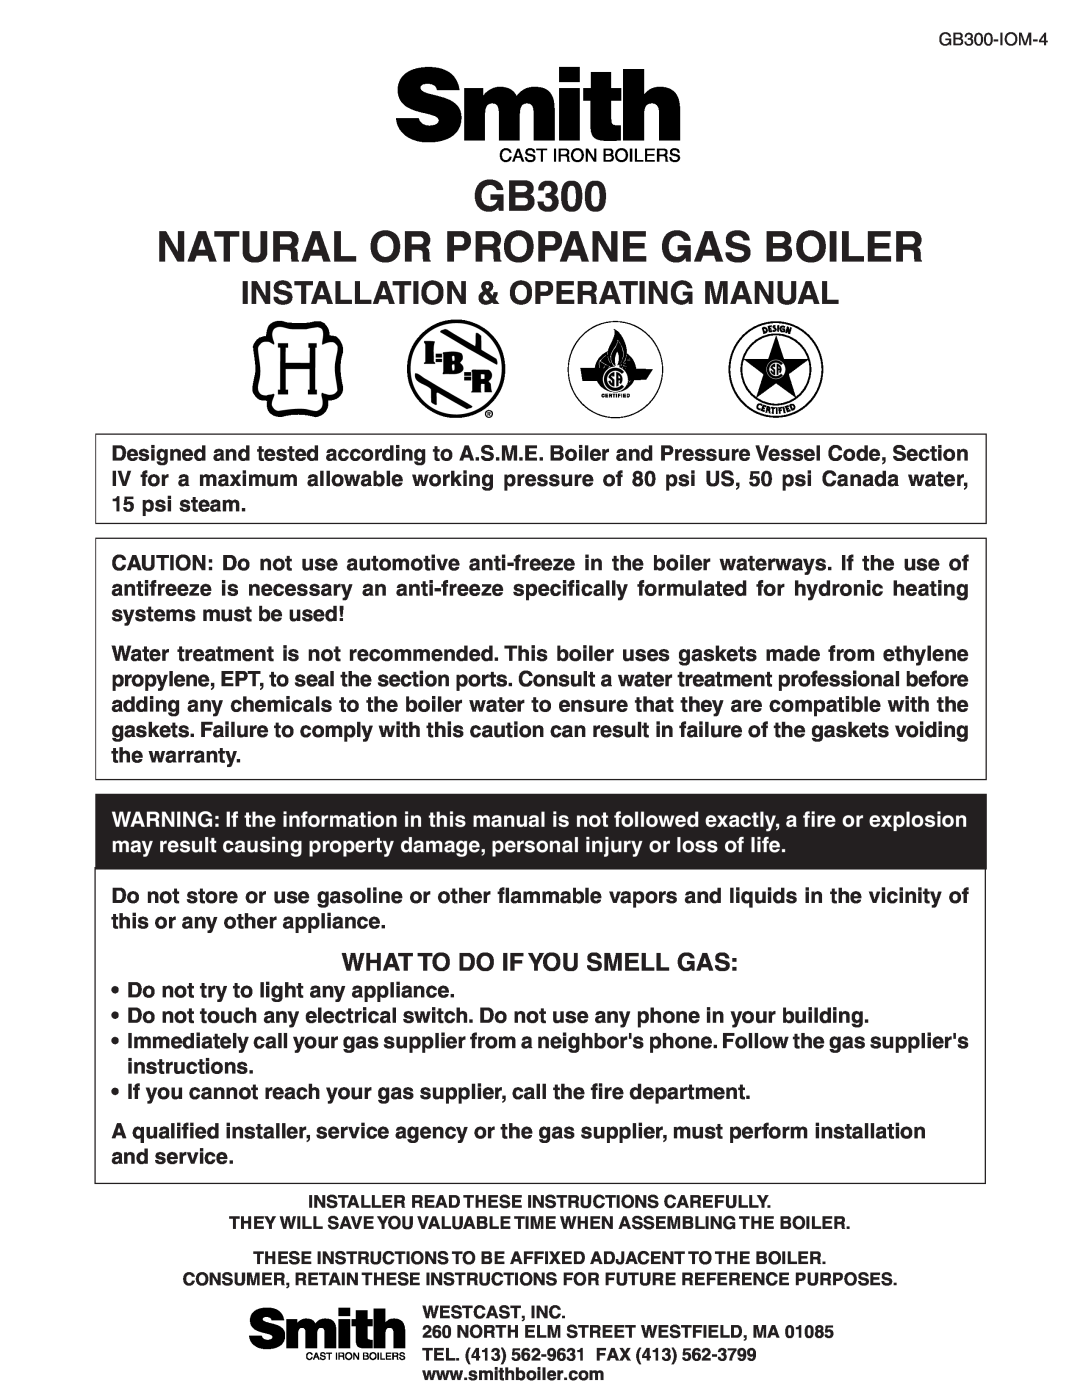 Smith Cast Iron Boilers warranty What To Do If You Smell Gas, GB300 NATURAL OR PROPANE GAS BOILER 